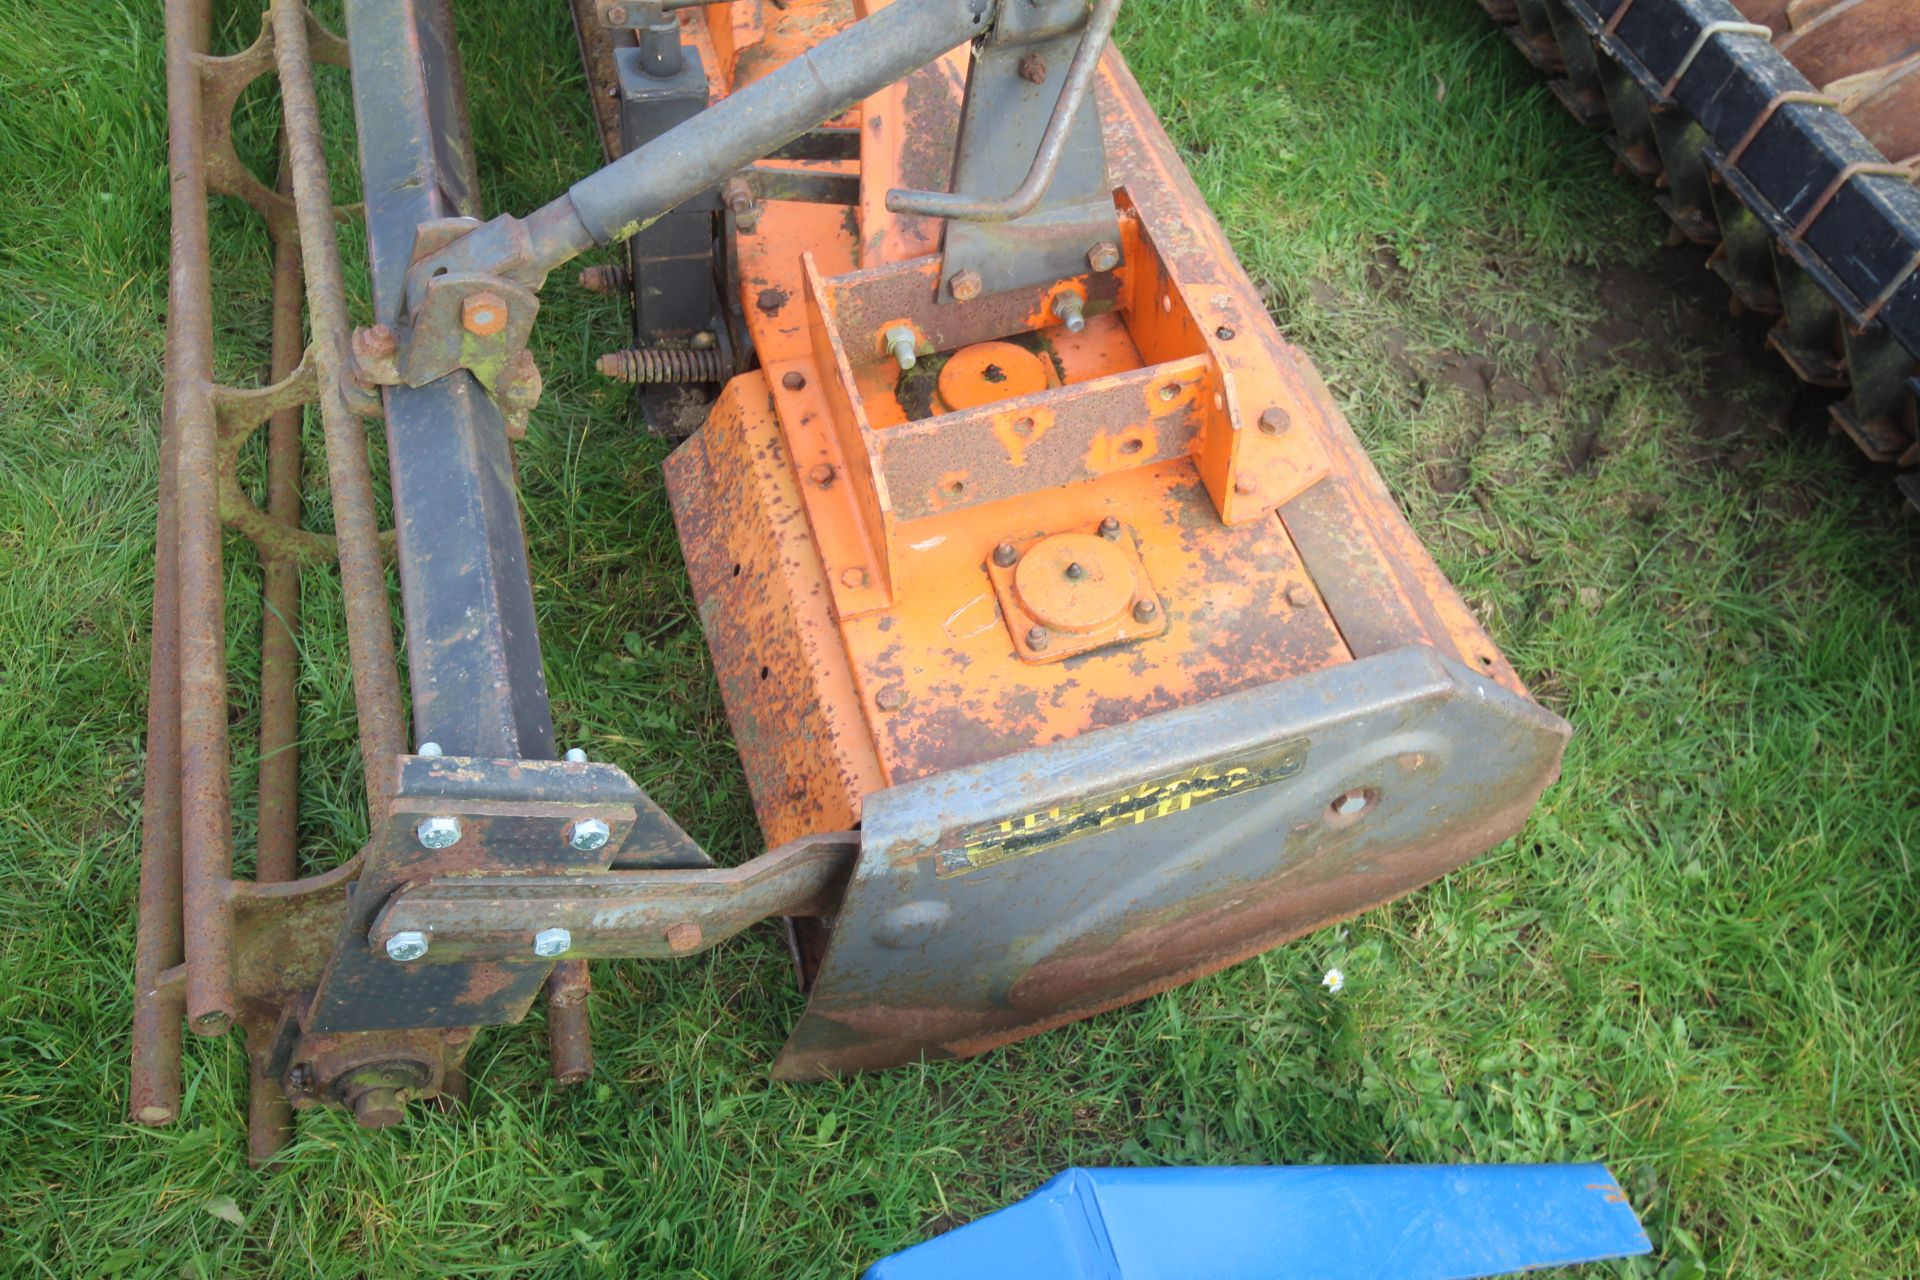 Westmac Pegararo 3m power harrow. Vendor reports owned since 2001 and used regularly. For sale due - Bild 13 aus 16